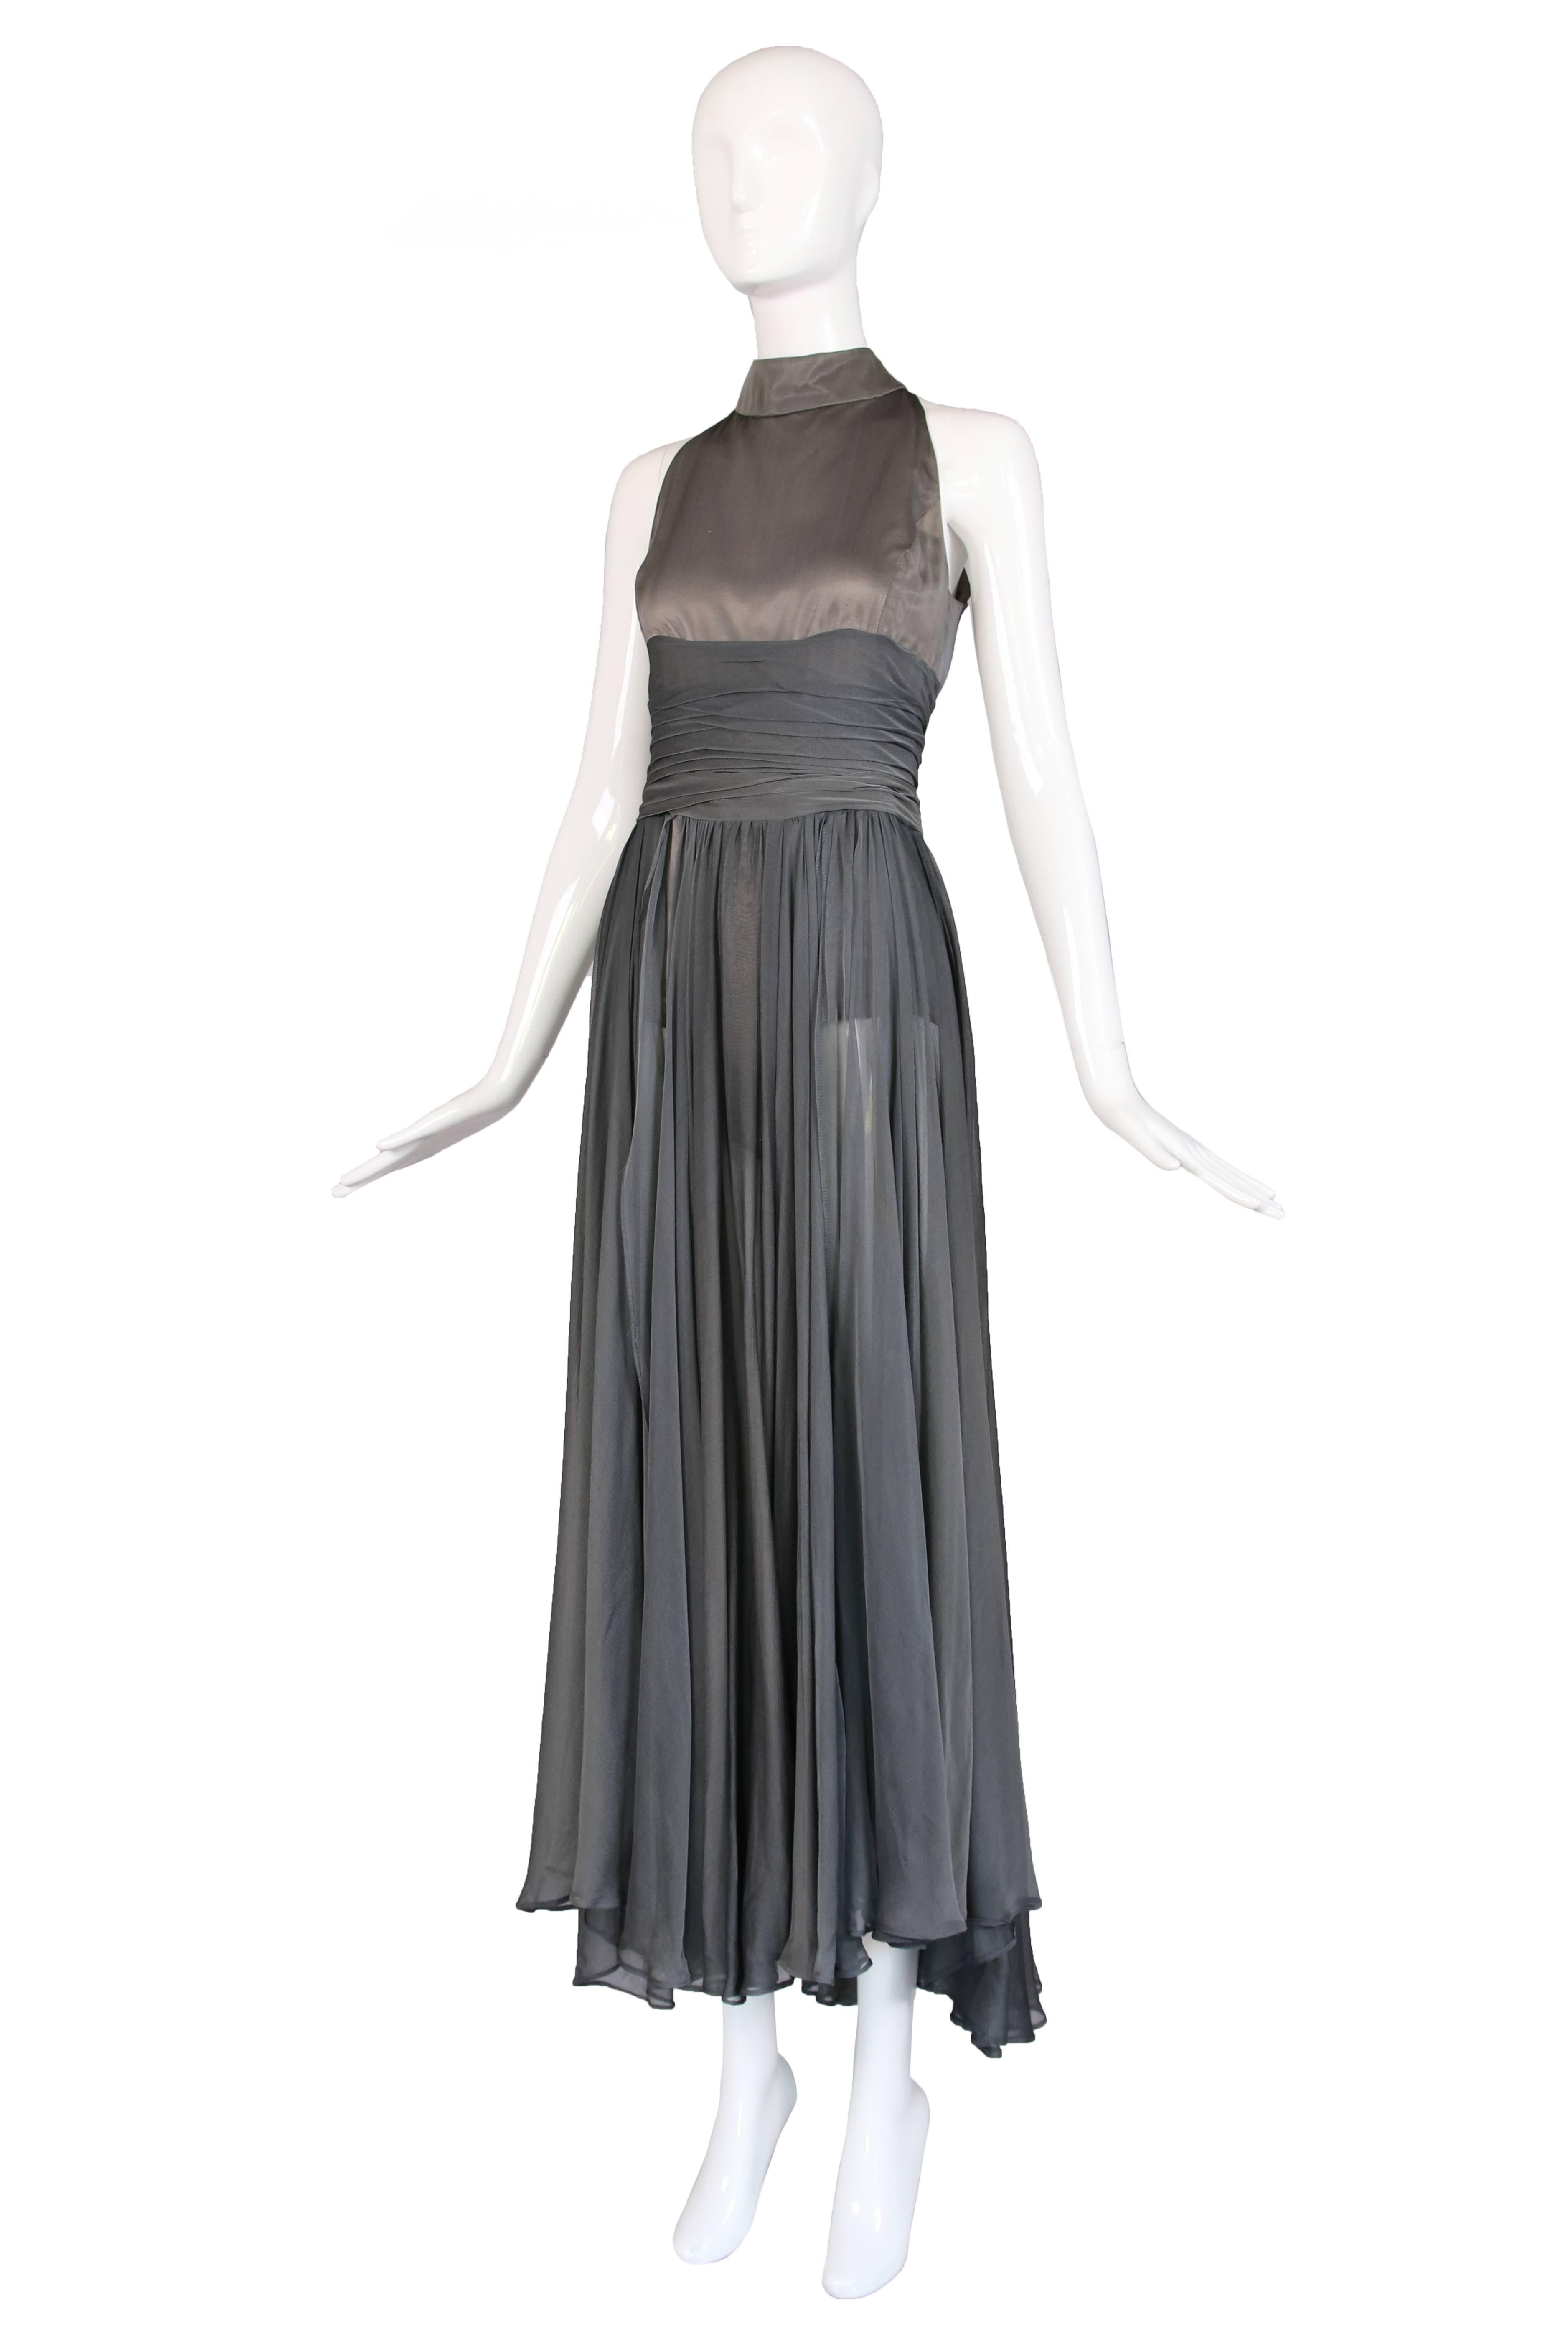 Circa 2003 Chloe by Stella McCartney gray silk chiffon and satin polyester evening gown with open chiffon paneled skirt and visible body suit/hot pants underneath. In very good to excellent condition with two or three light stains in the chiffon